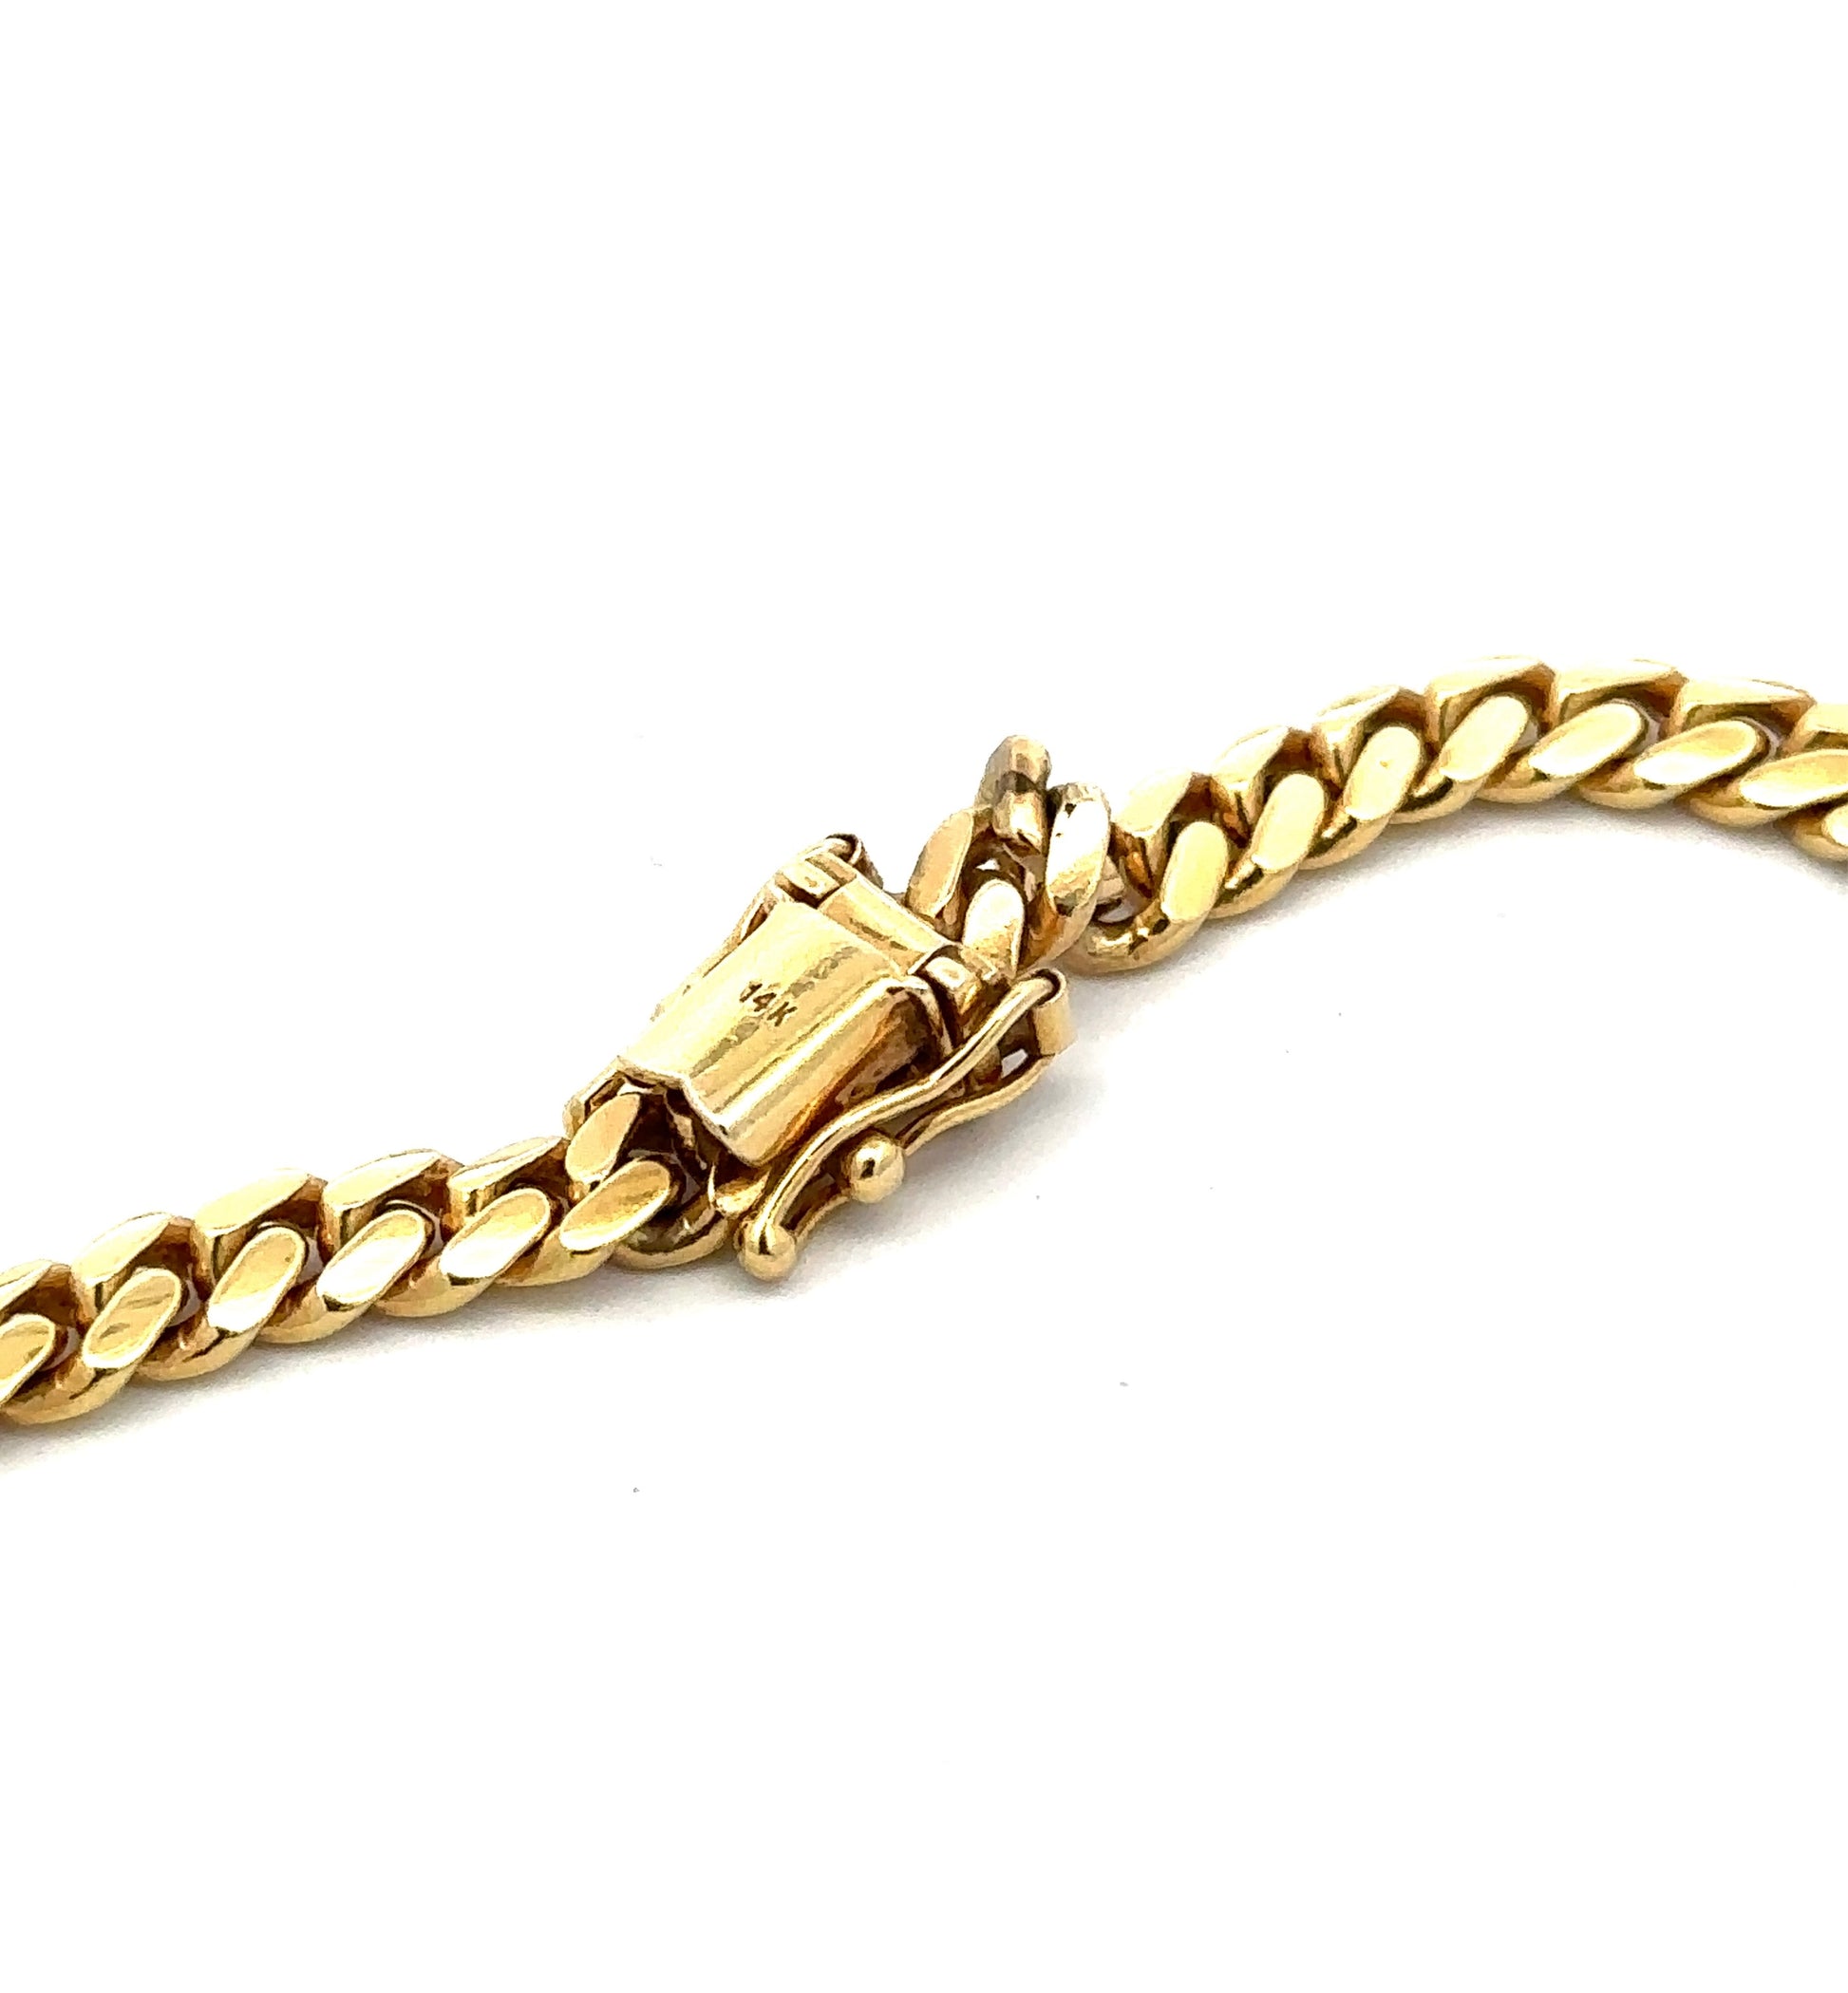 14K yellow gold box clasp with 2 safety locks